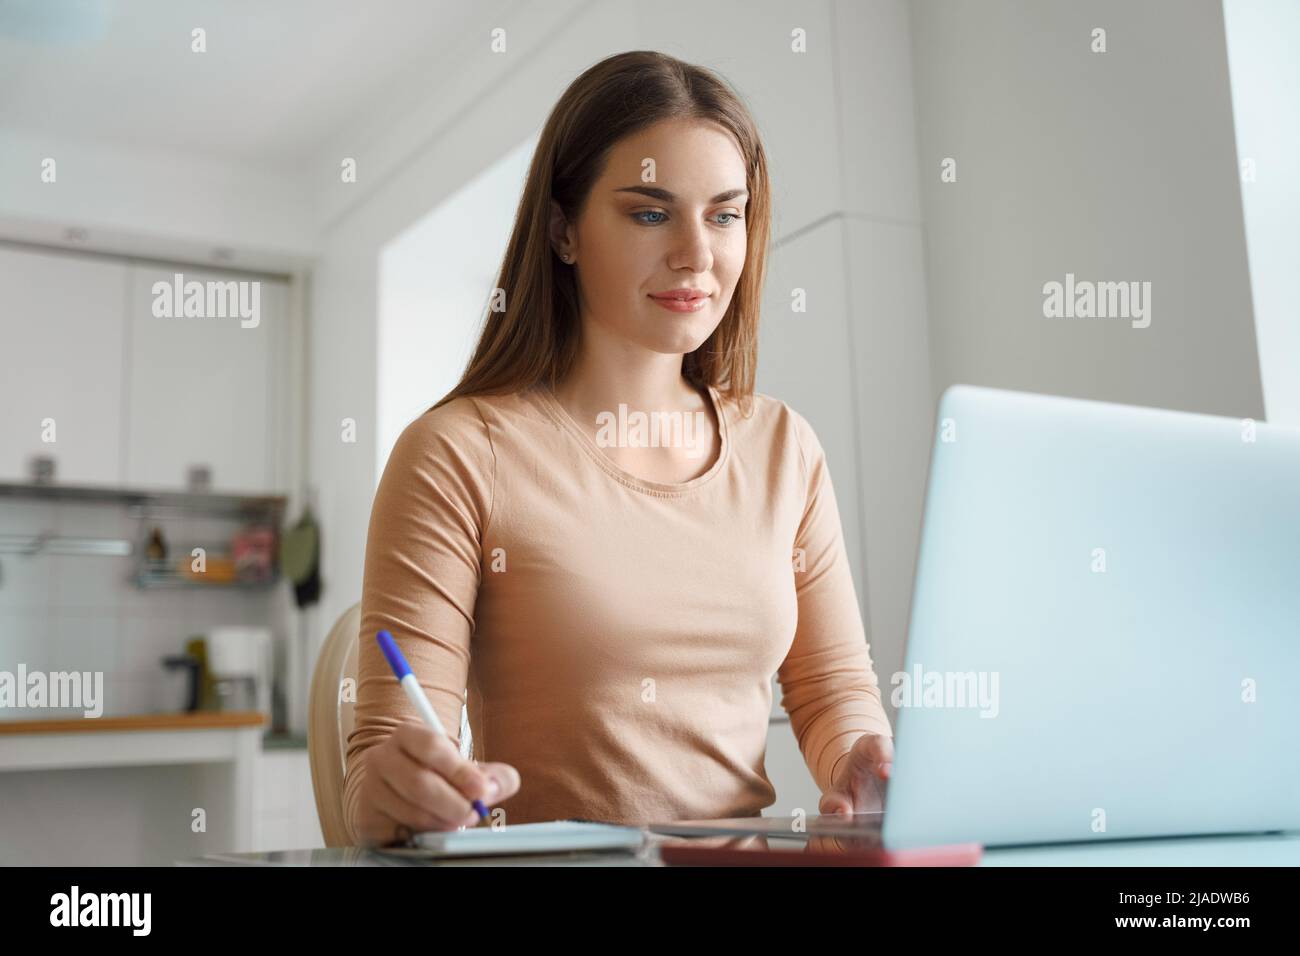 Young teenage woman watching online video tutorial on laptop Stock Photo